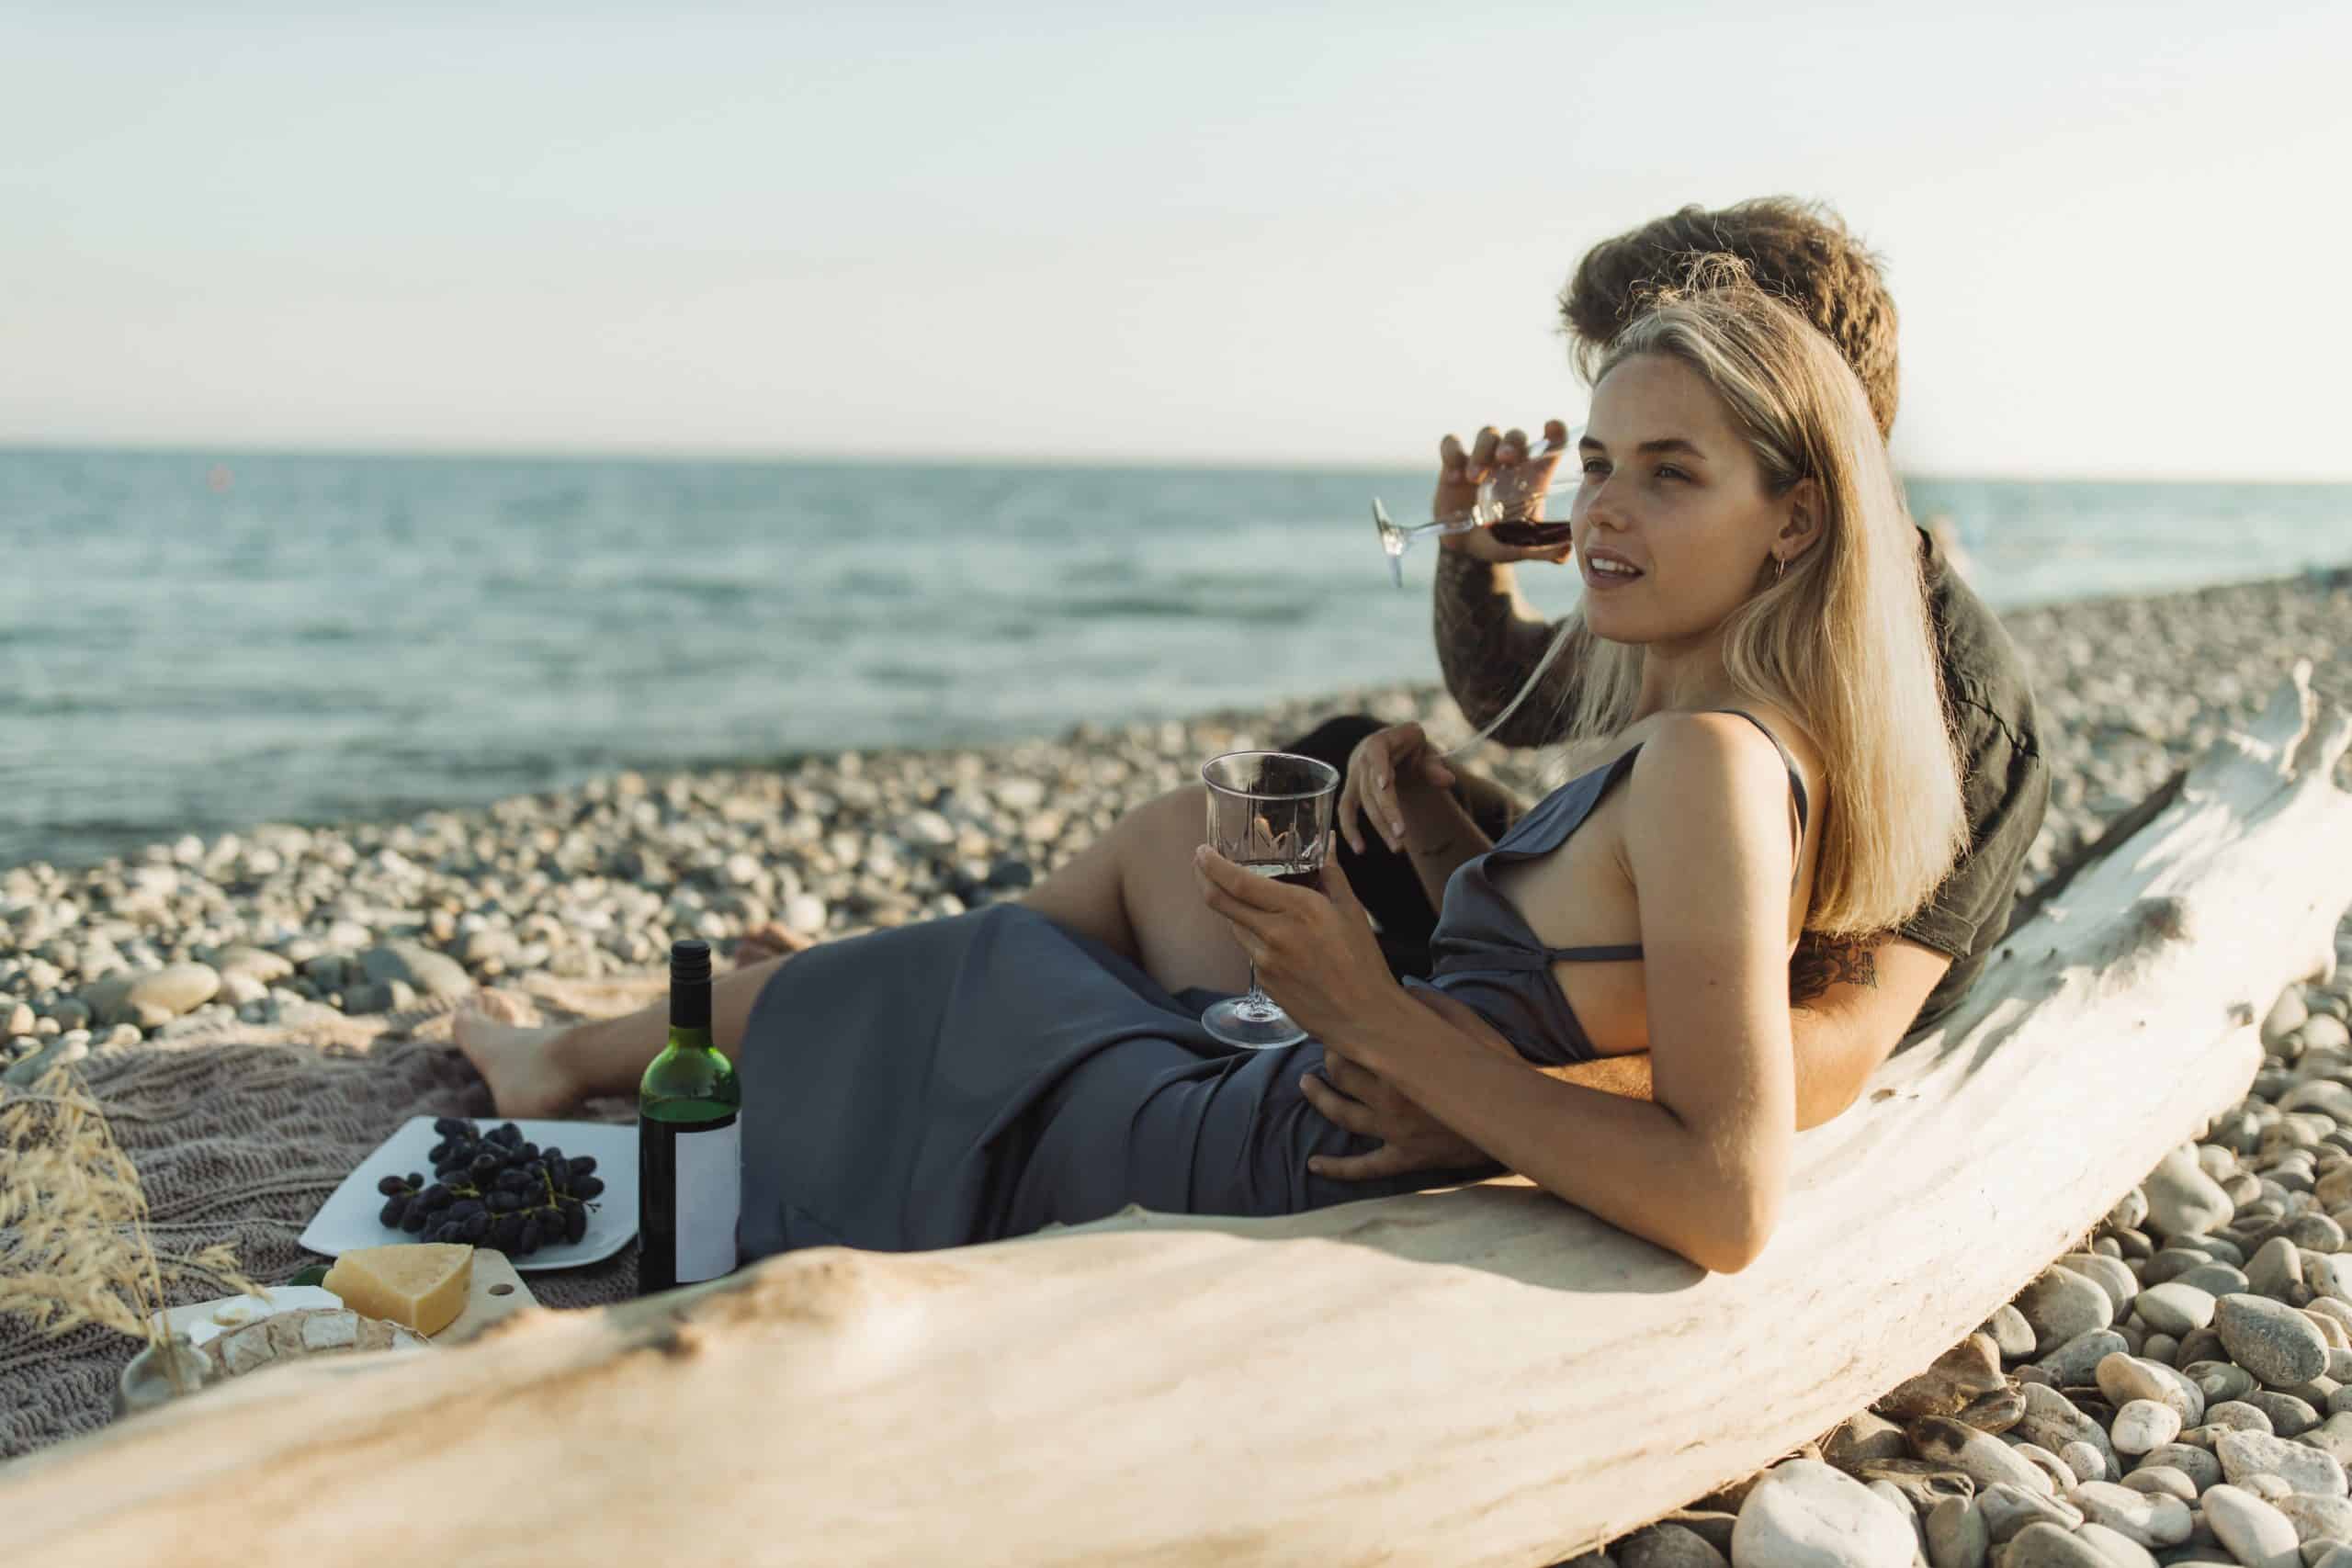 Man and woman on their honeymoon sit on the beach and drink wine together